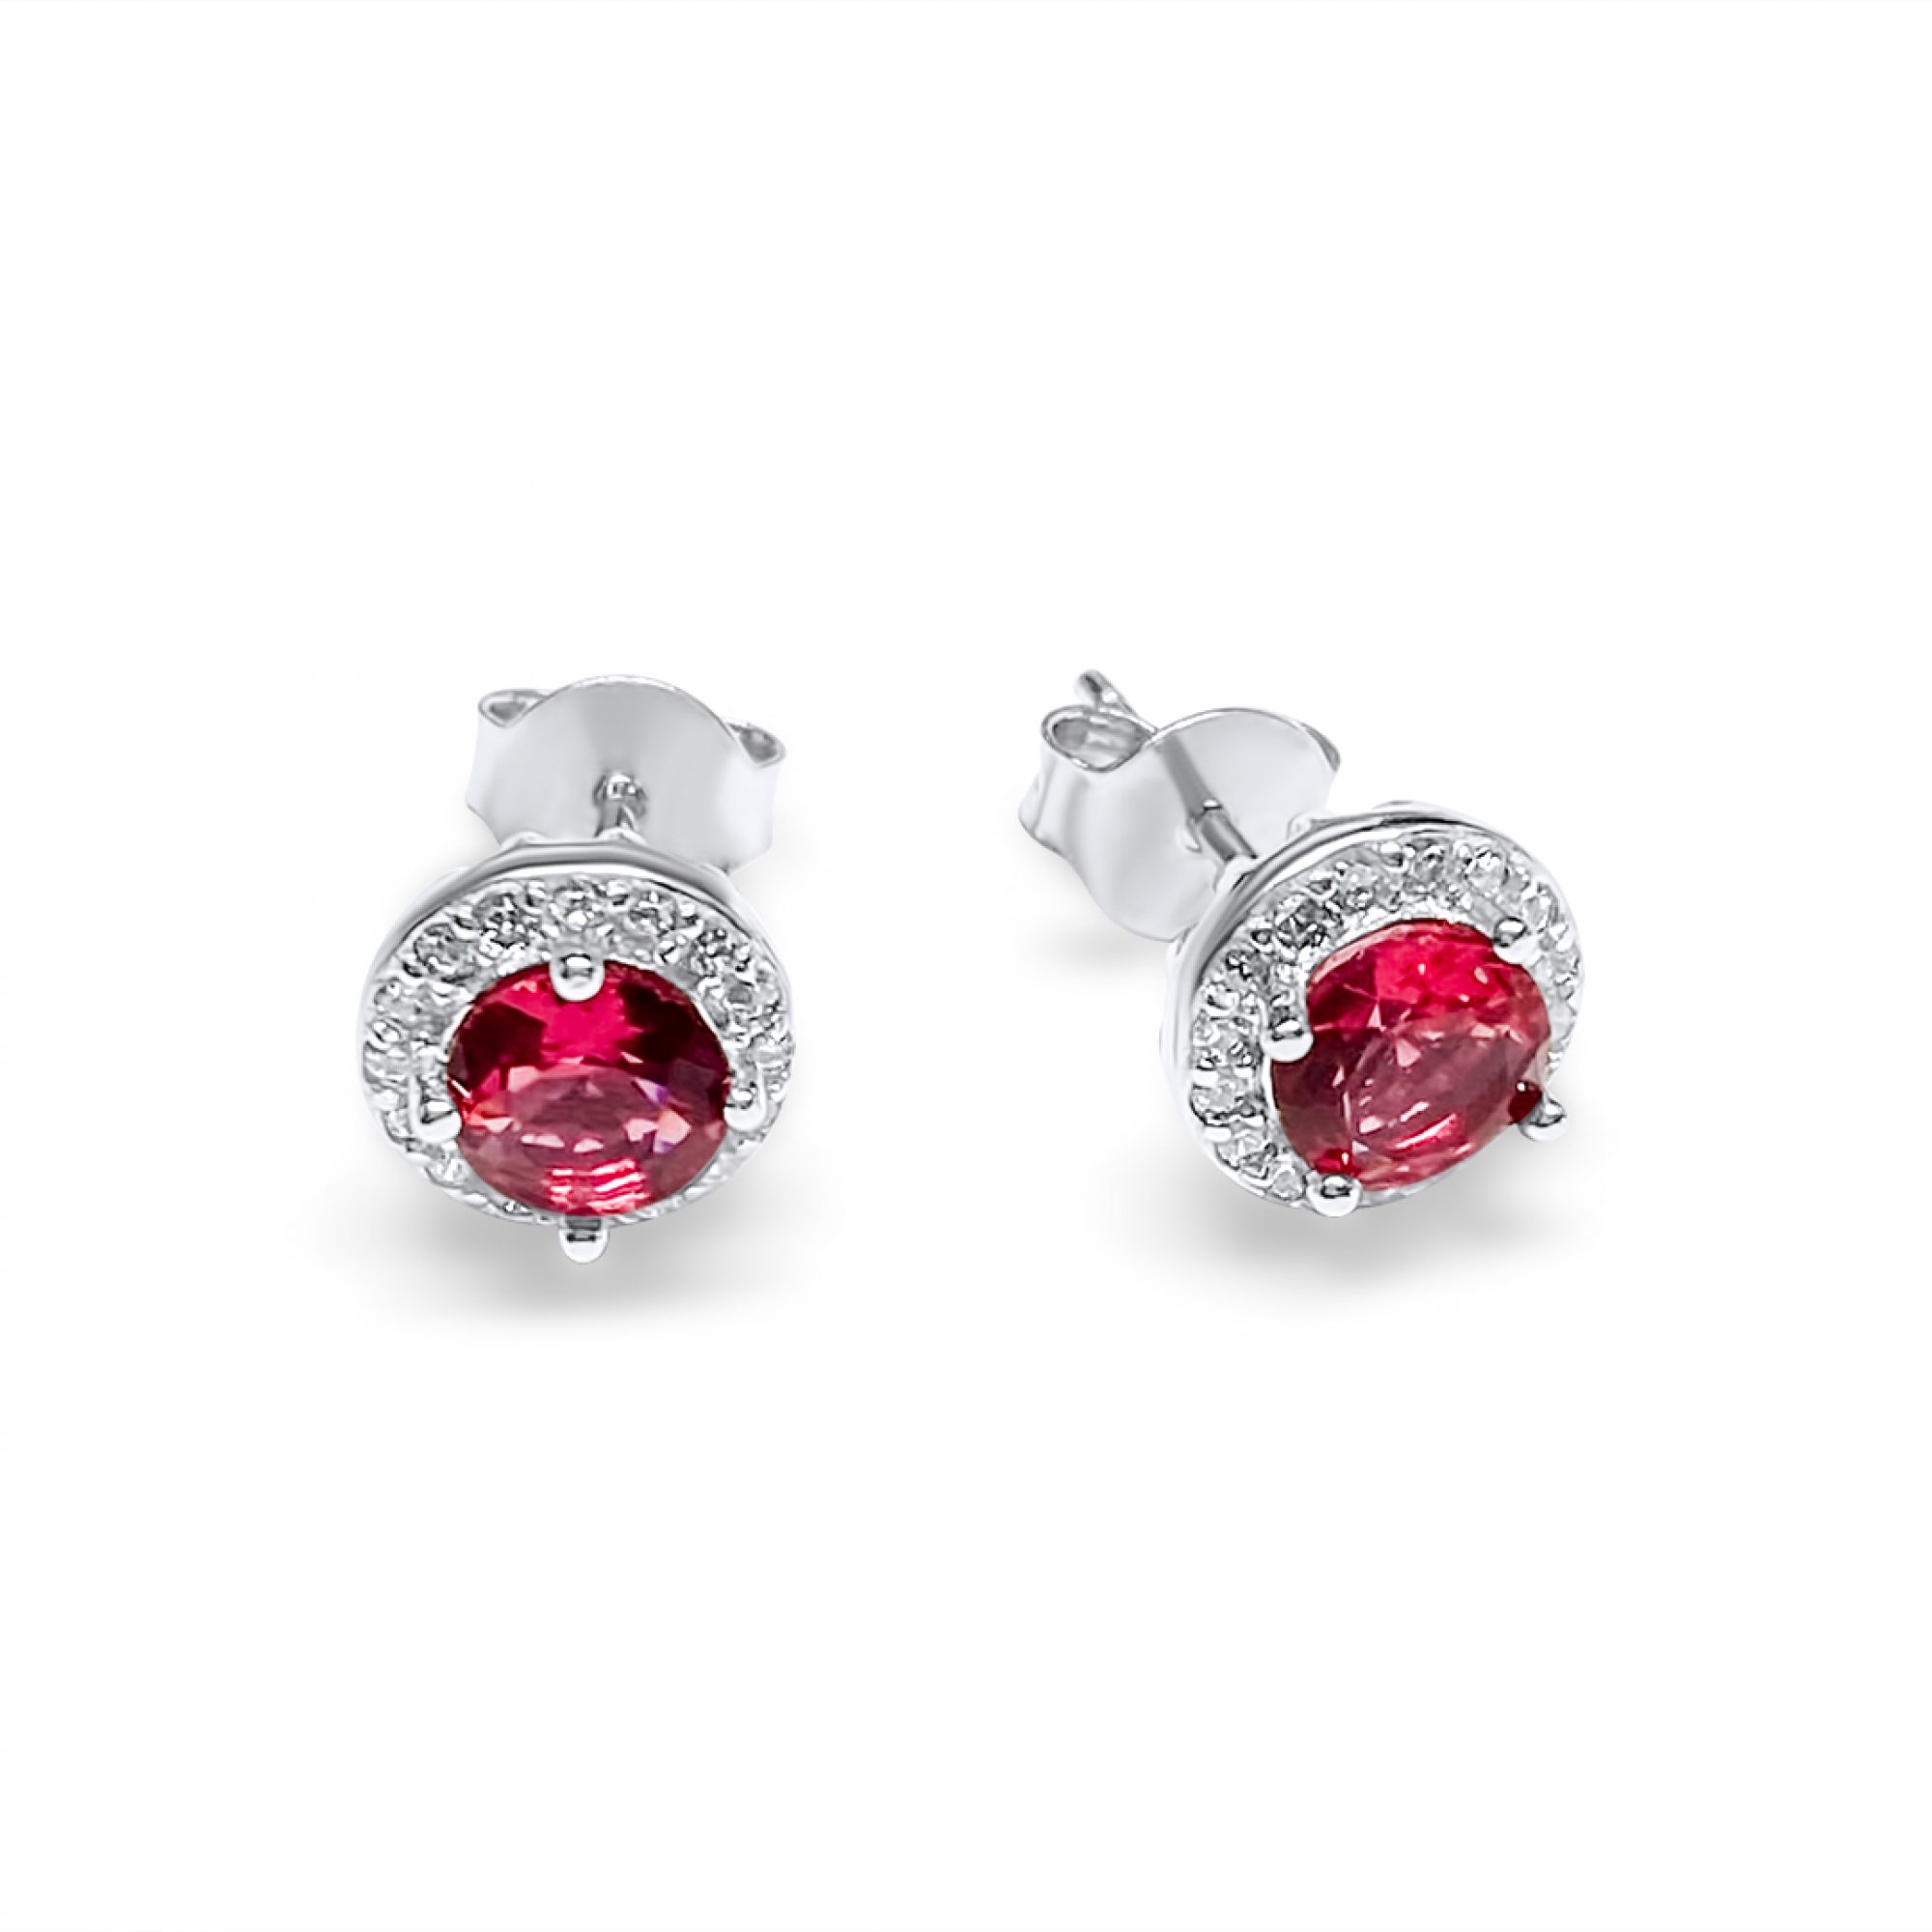 Silver stud earrings with ruby and zircon stones